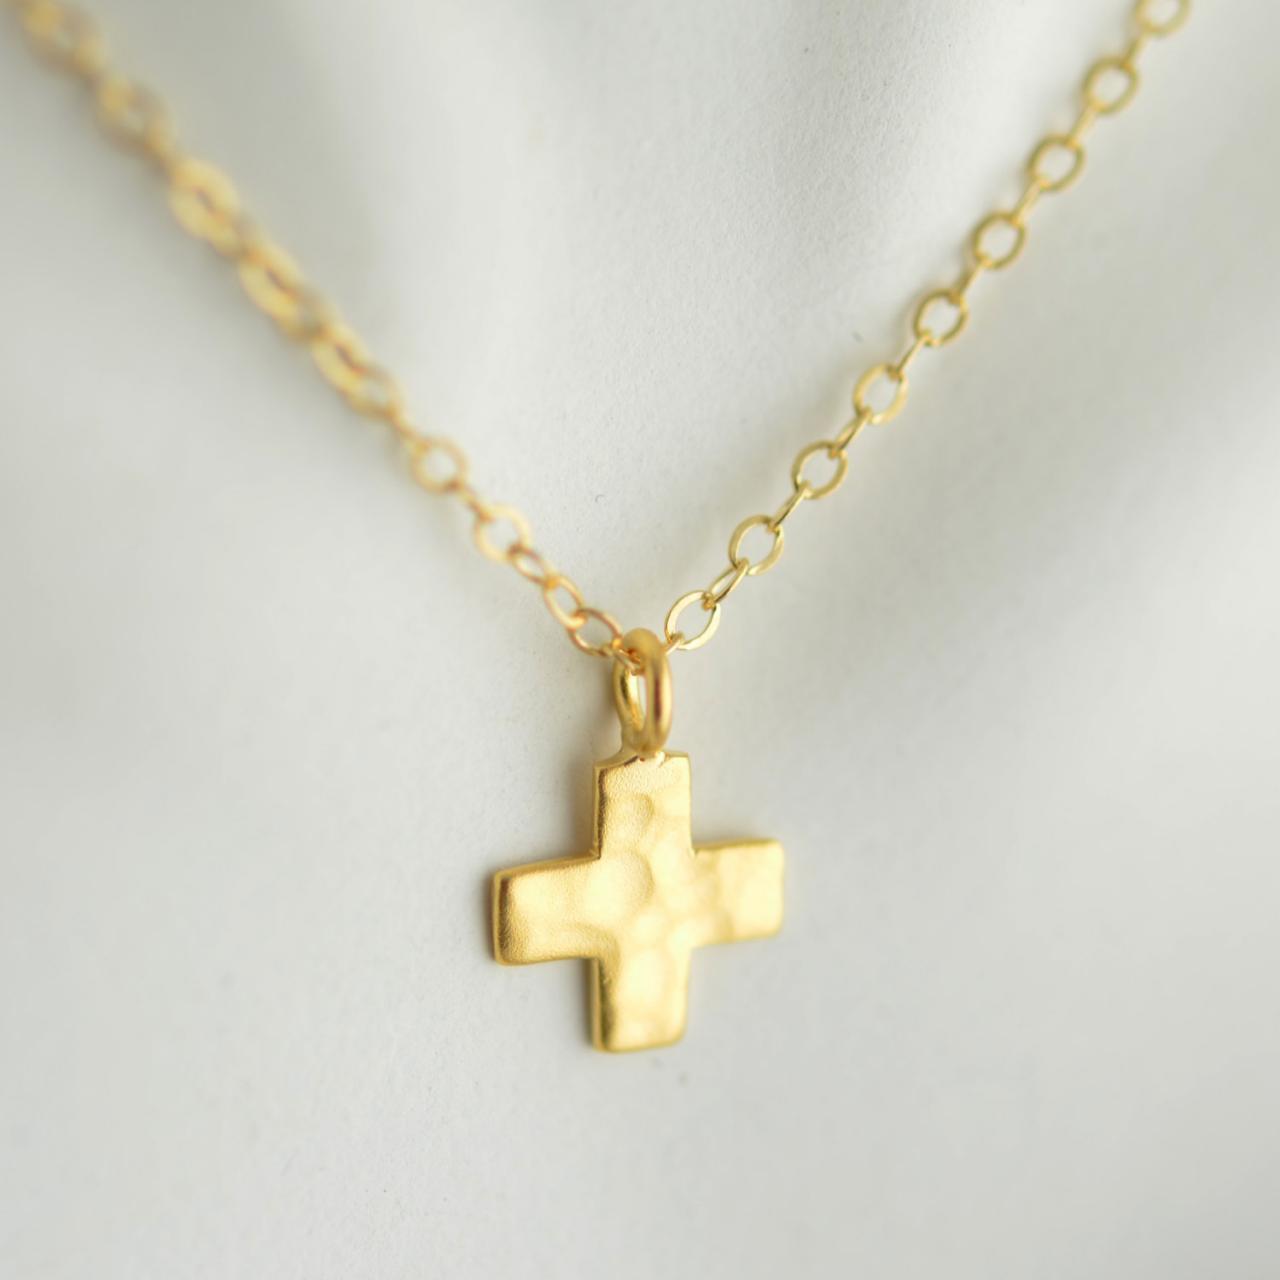 Womens Hammered Cross Charm Necklace,14k Gold Necklace, Everyday Necklace,gift For Her